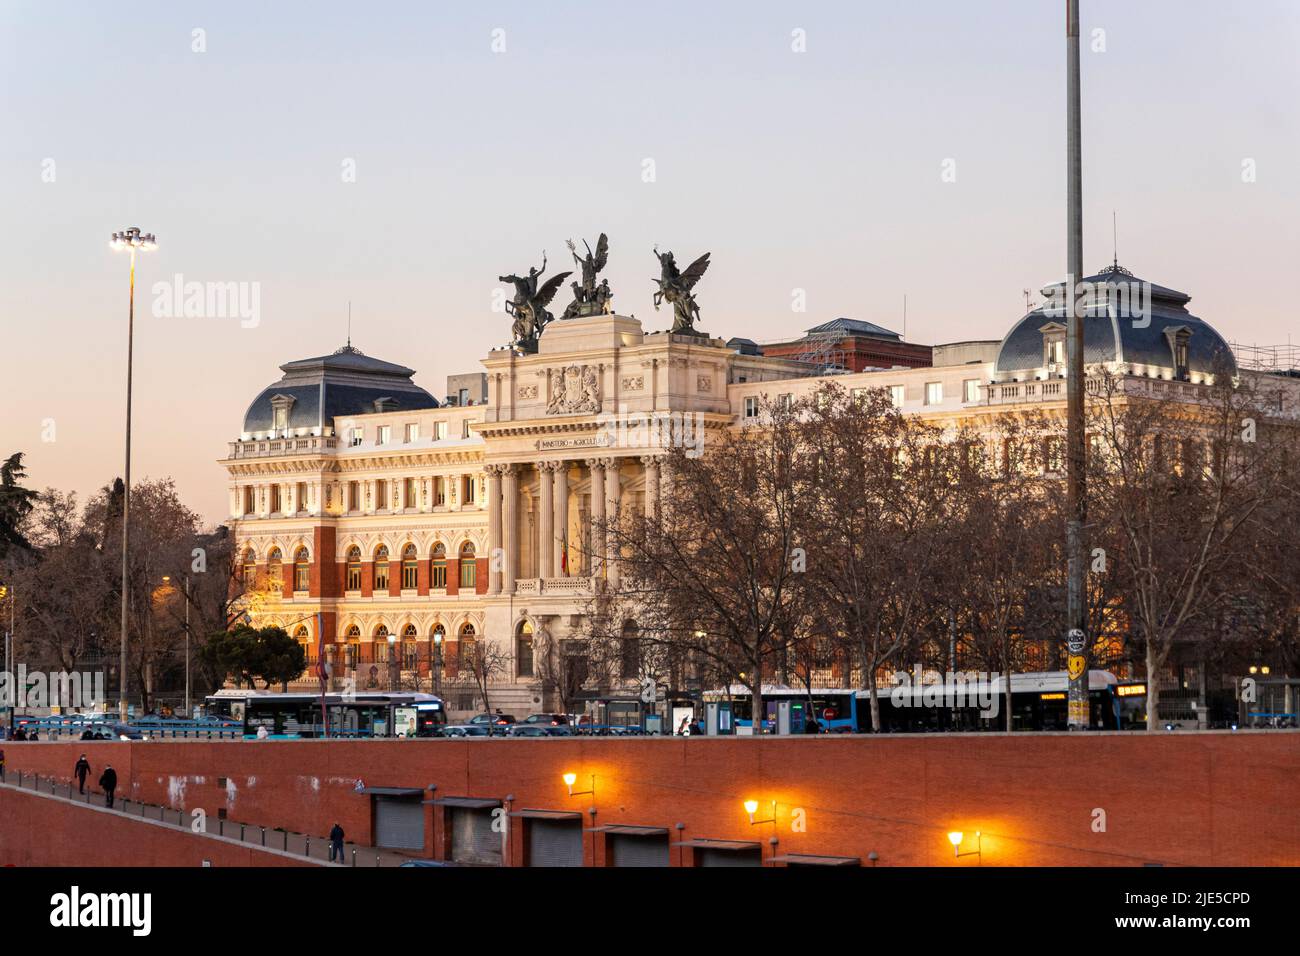 Madrid, Spain. Main building of the Ministerio de Agricultura, Pesca y Alimentacion (Ministry of Agriculture, Fisheries and Food) near Atocha Stock Photo